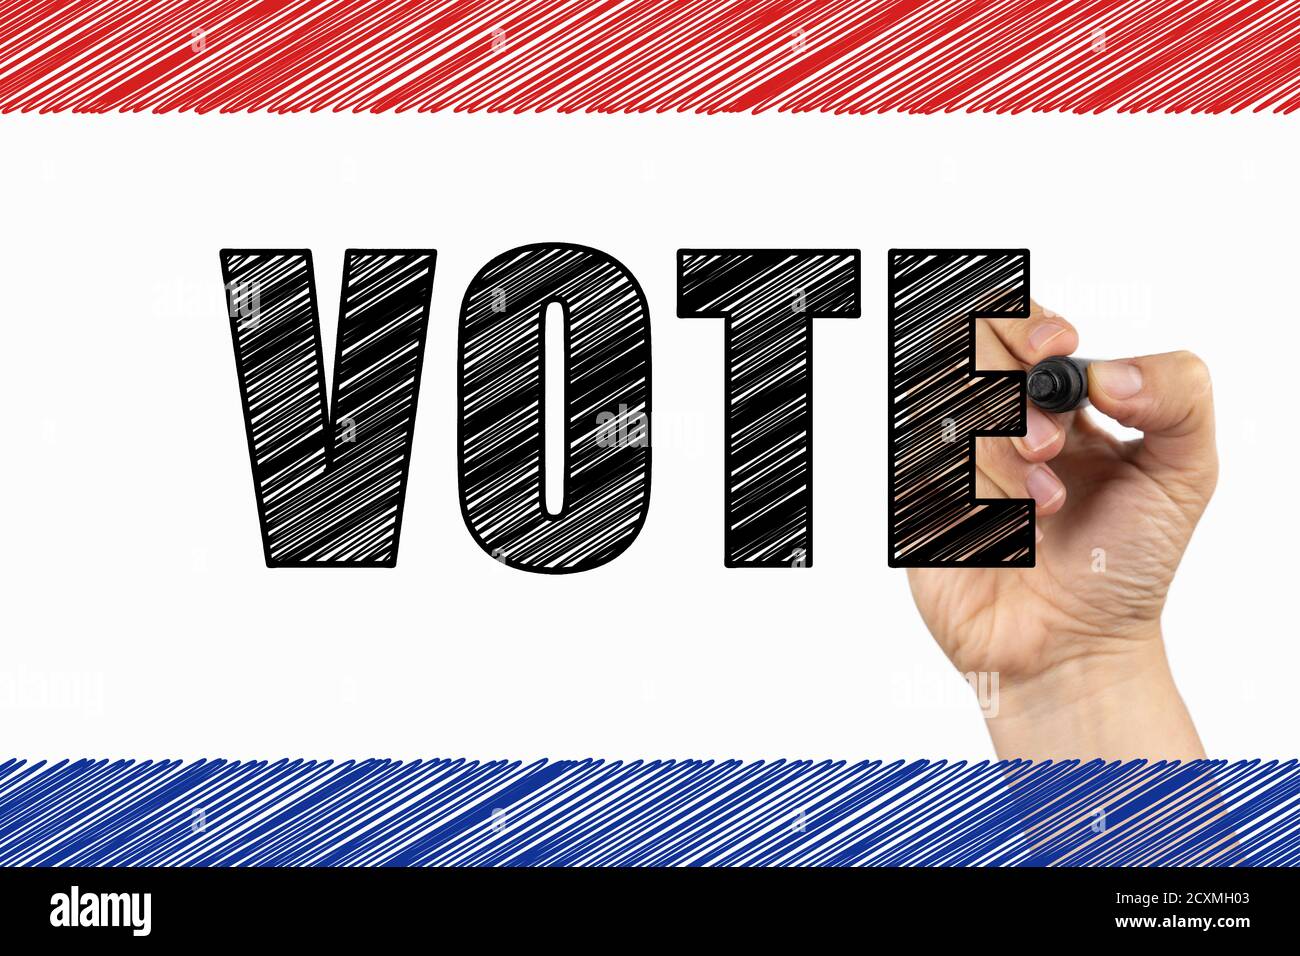 Vote sign, red and blue lines. Doodle  on a whiteboard, written with black marker in a hand. Scribble sketch text on a board Stock Photo